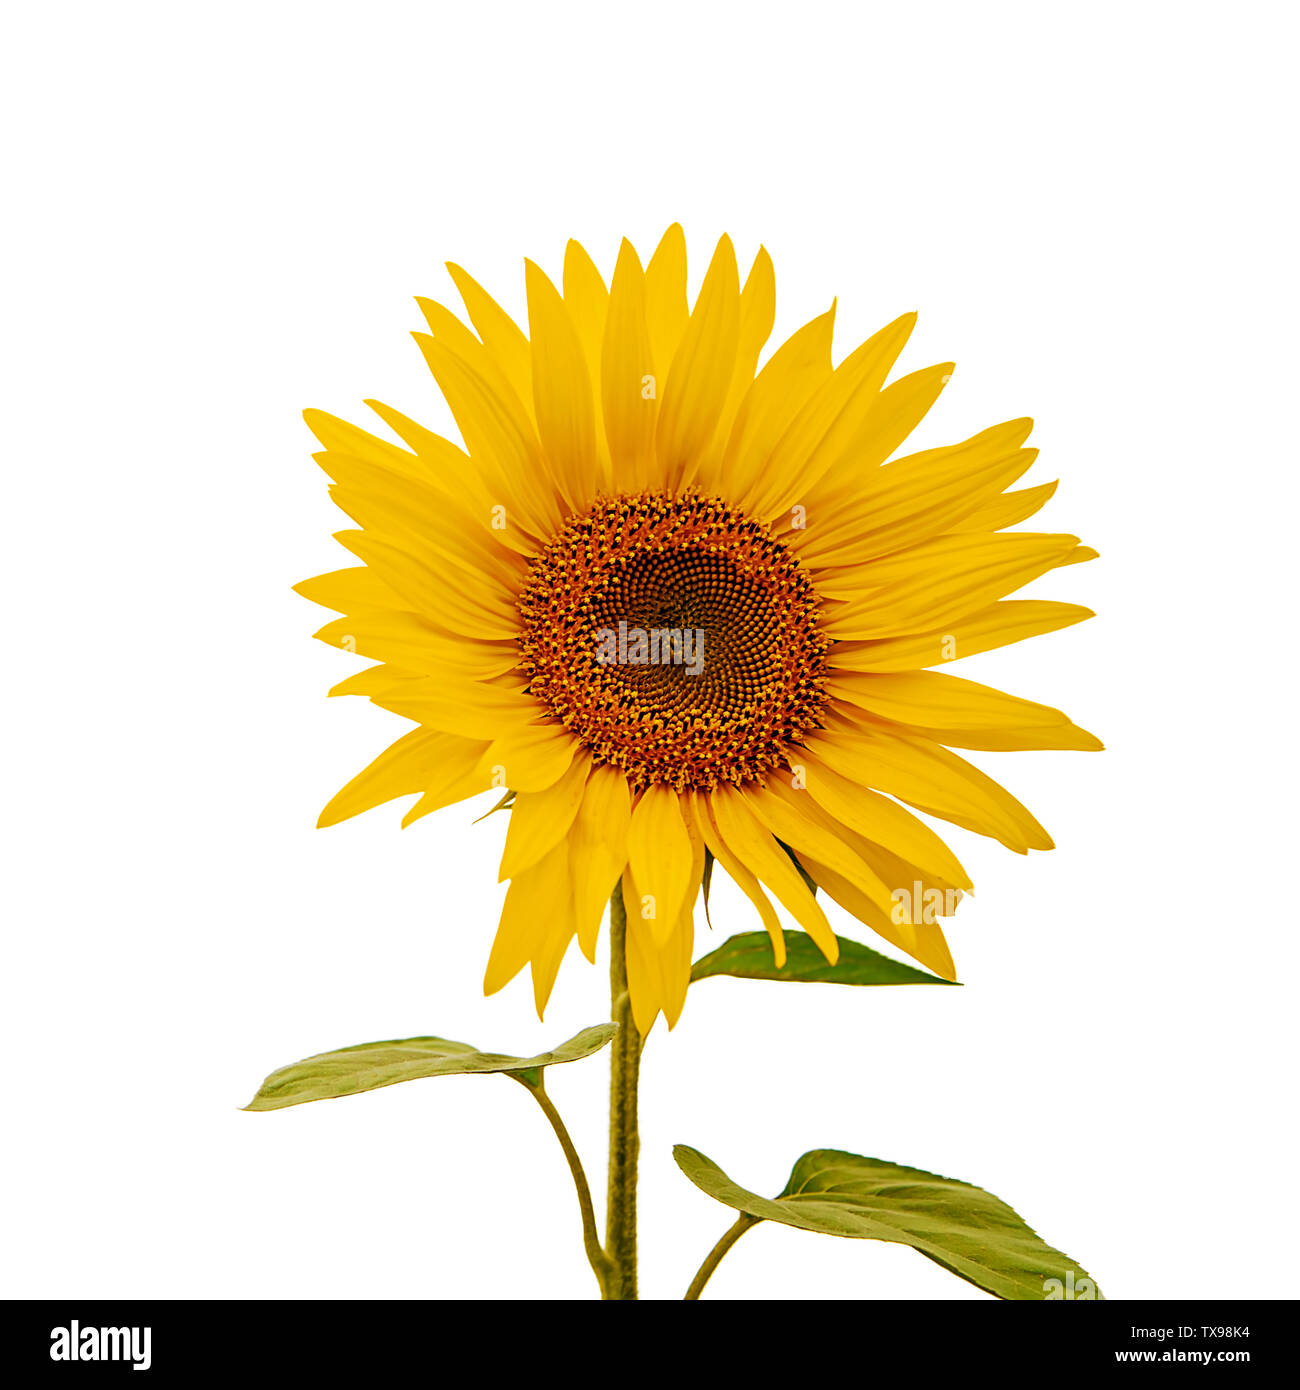 Sunflower field isolated on white background. Object Stock Photo